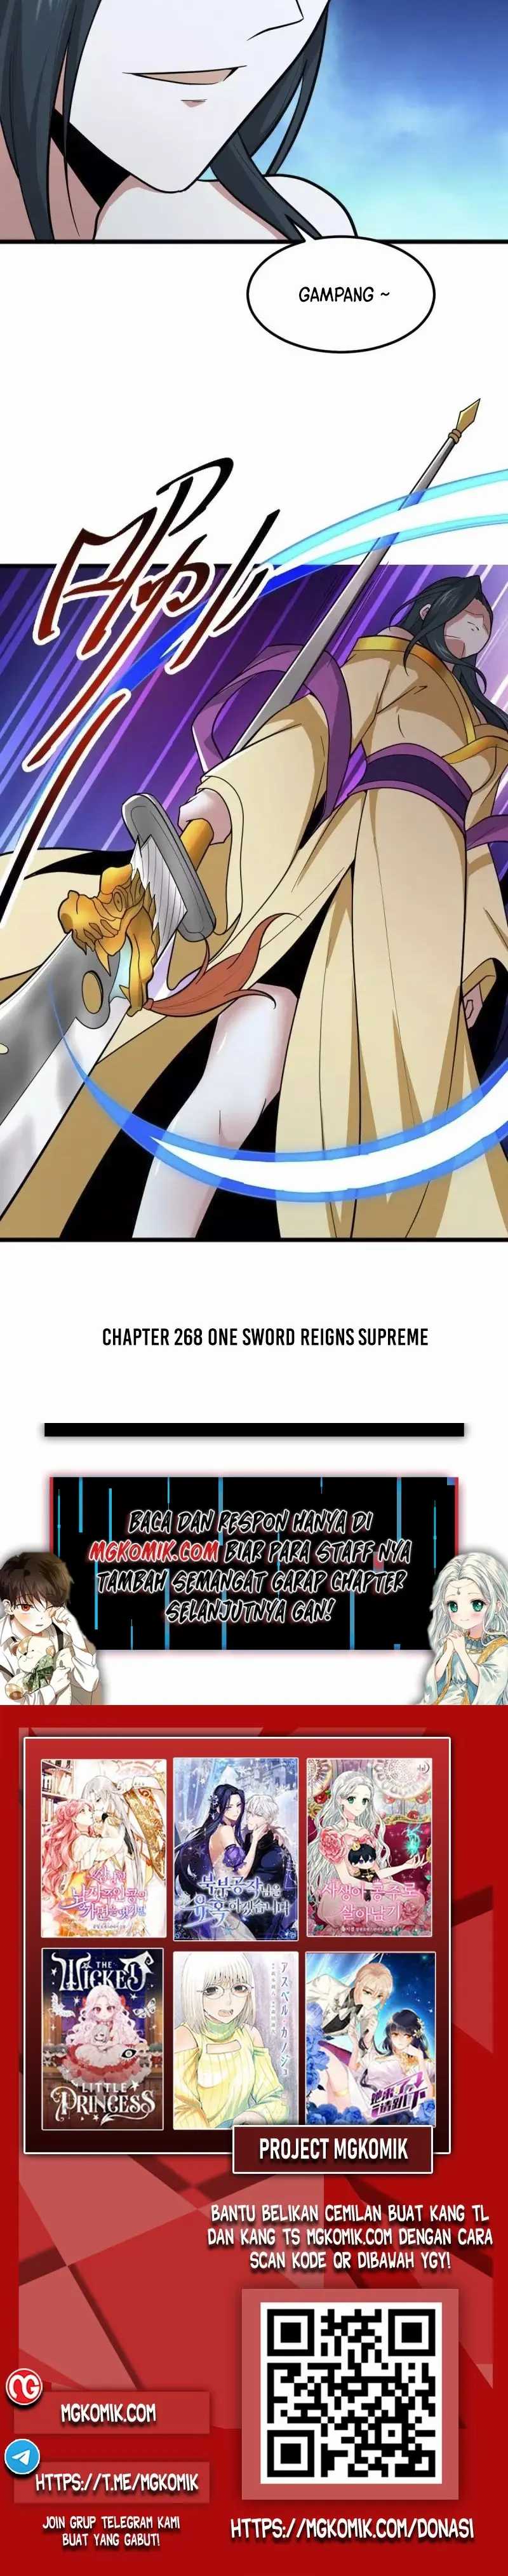 Domination One Sword Chapter 268